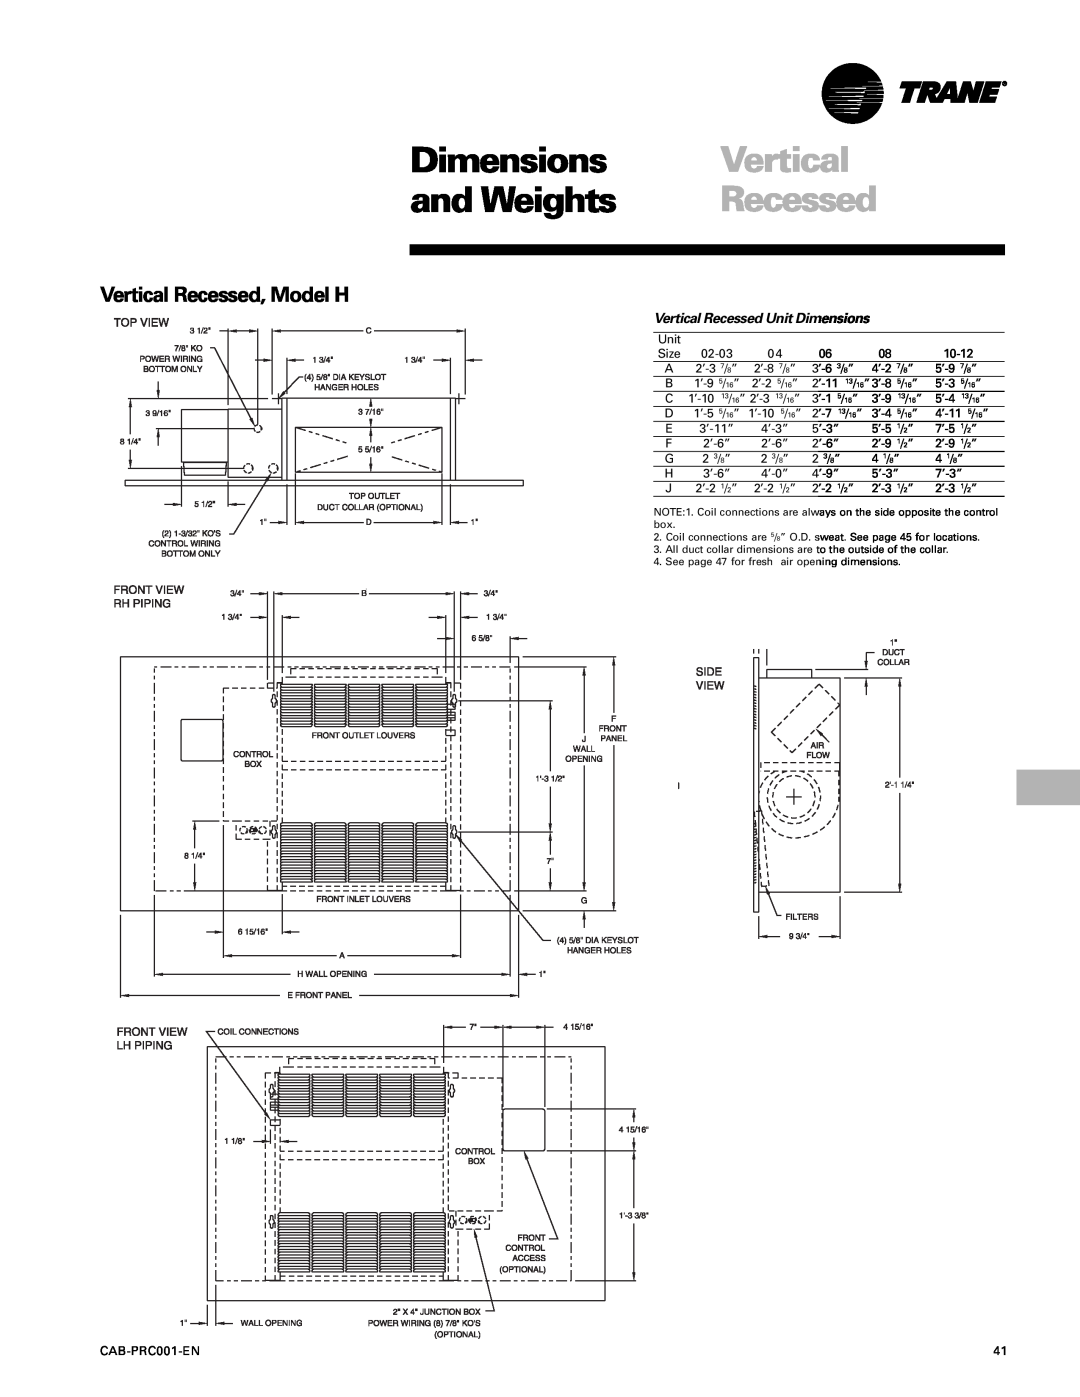 Trane CAB-PRC001-EN manual Dimensions, and Weights, Vertical Recessed, Model H 